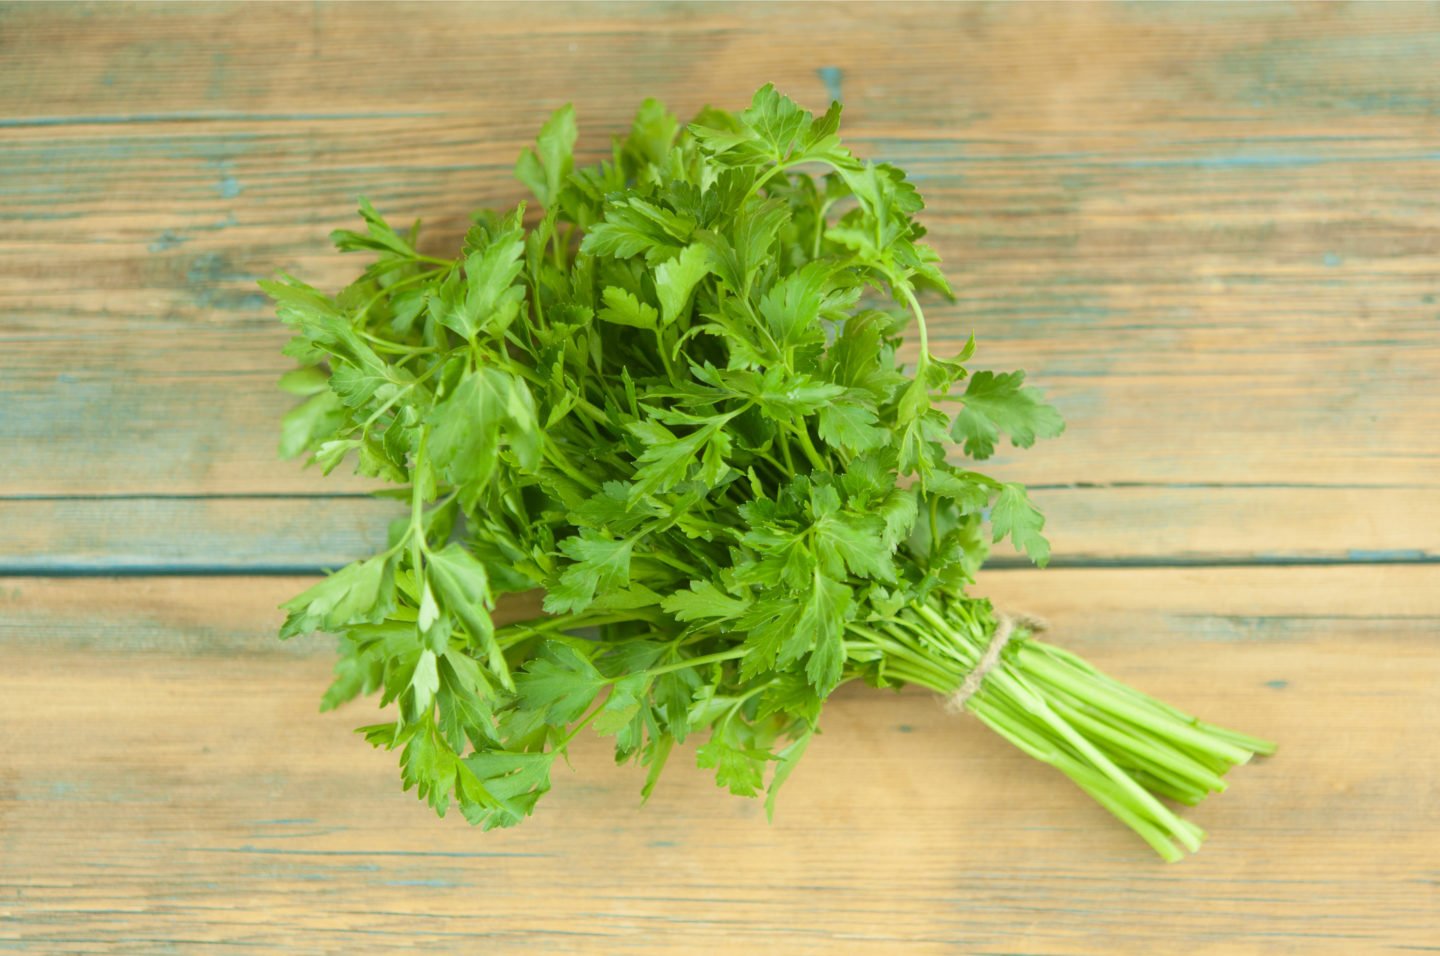 parsley as a green onion substitute